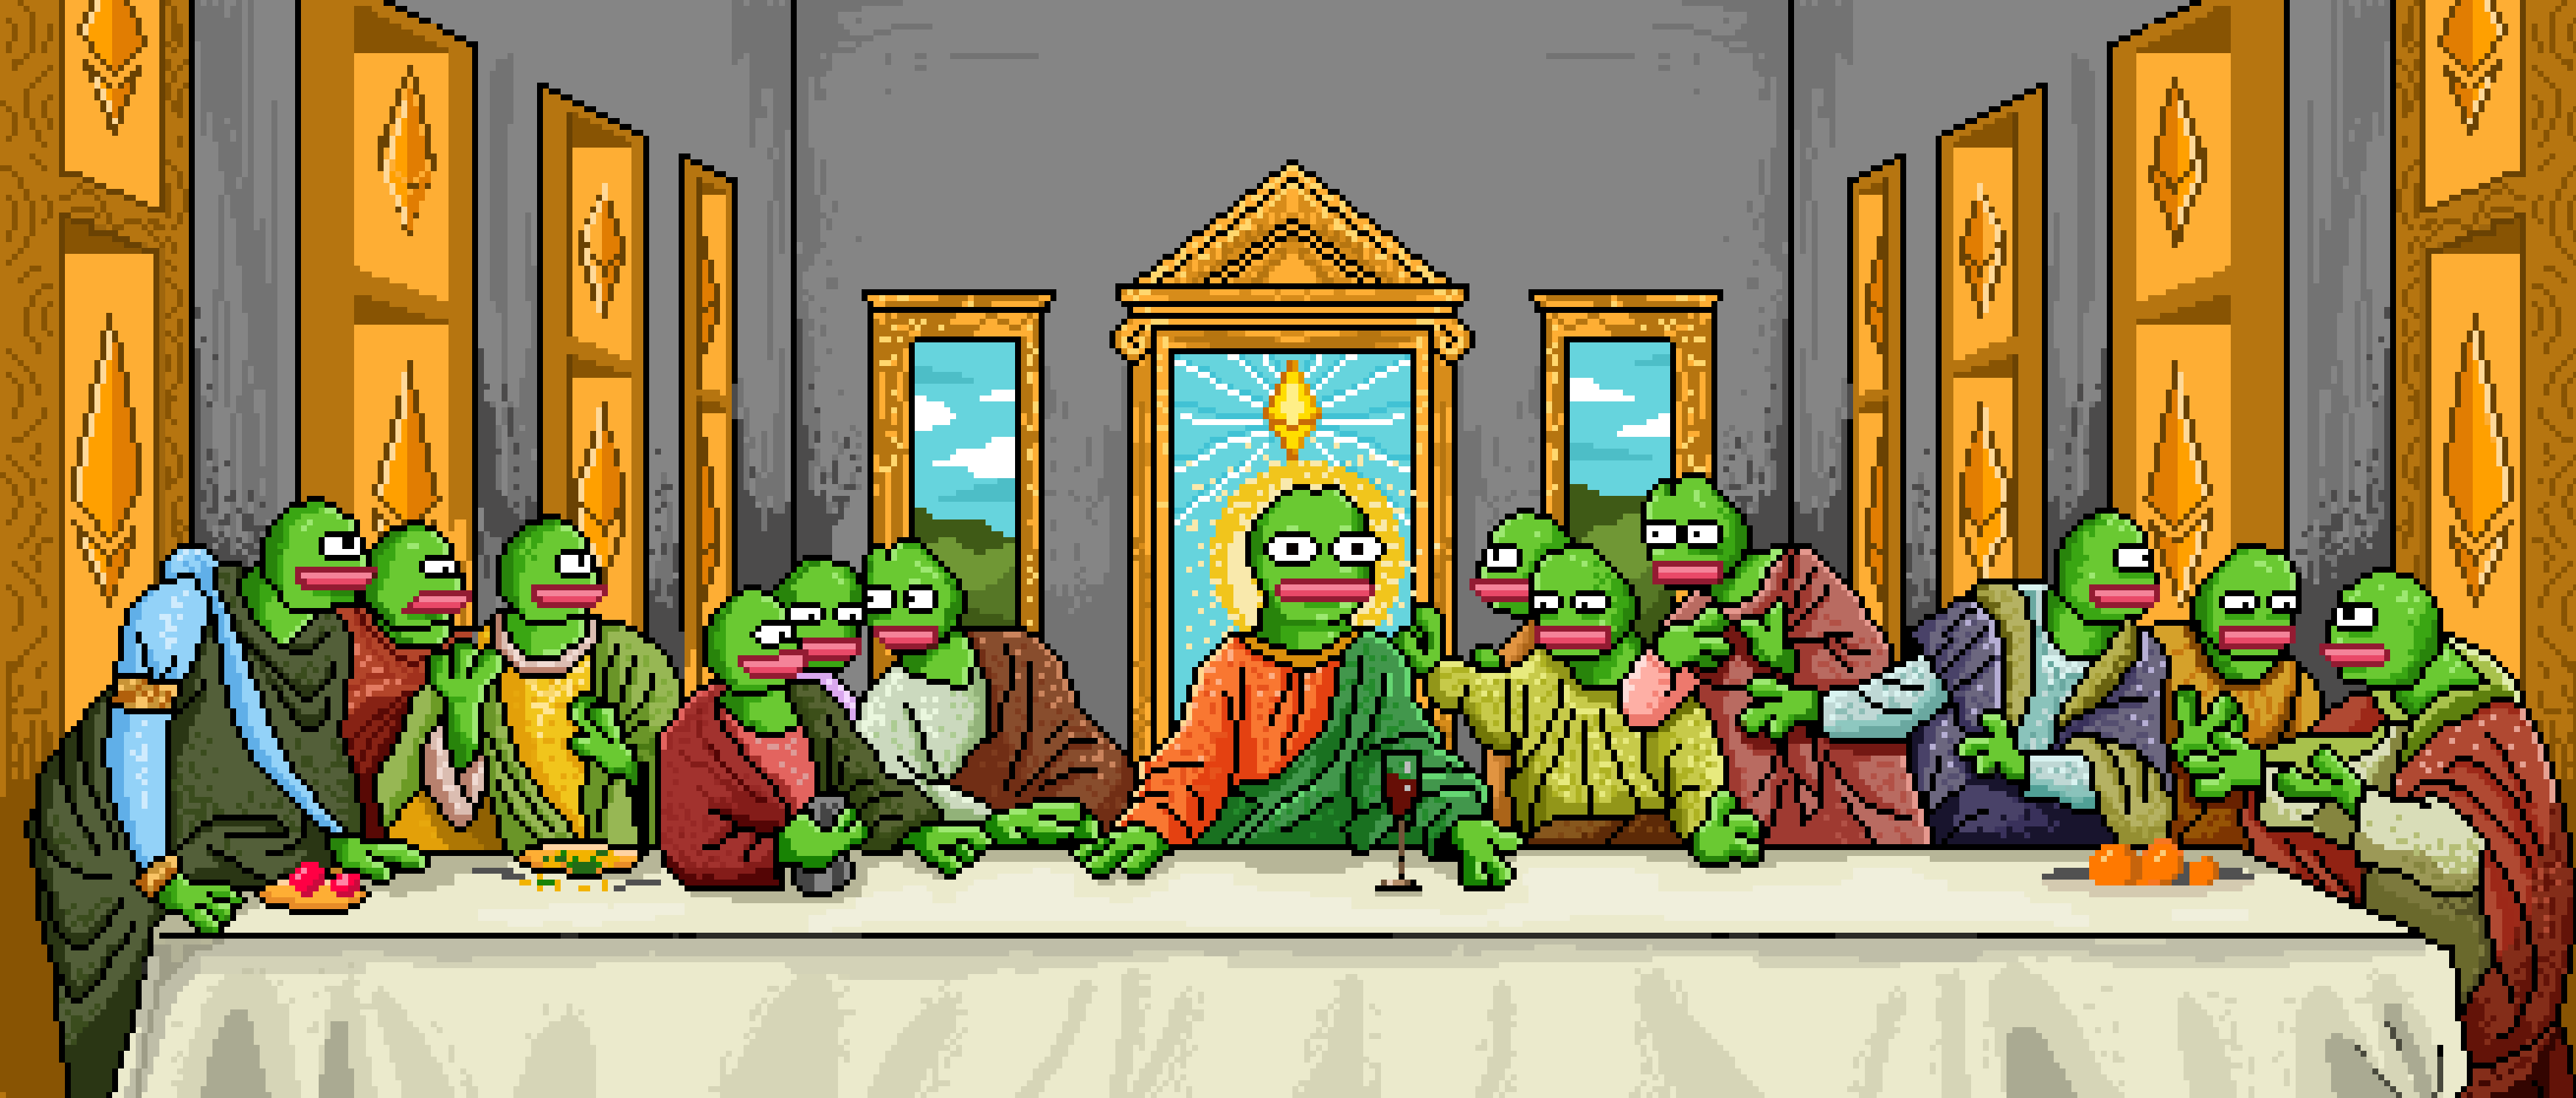 The Last Supper 🐸 🐸 🐸 | Foundation